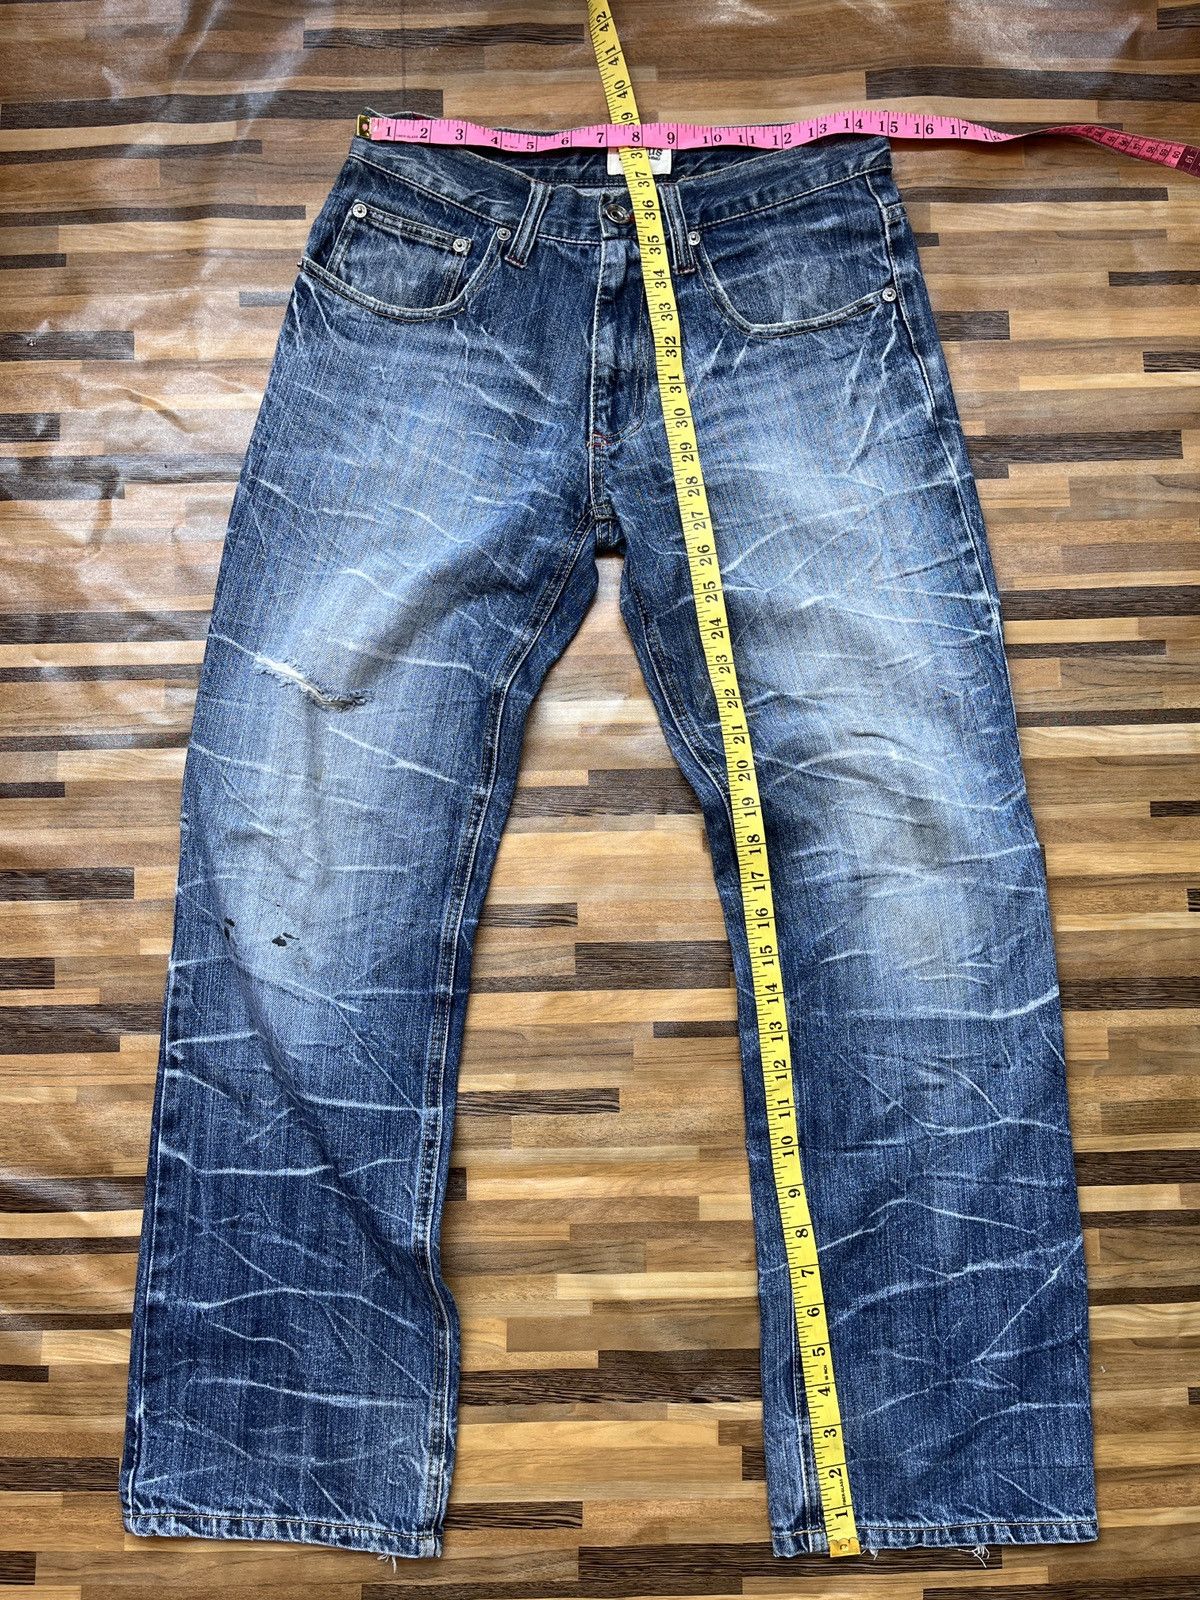 Japanese Brand - Nylaus Clothing Hysteric Style Denim Jeans Seditionaries - 4